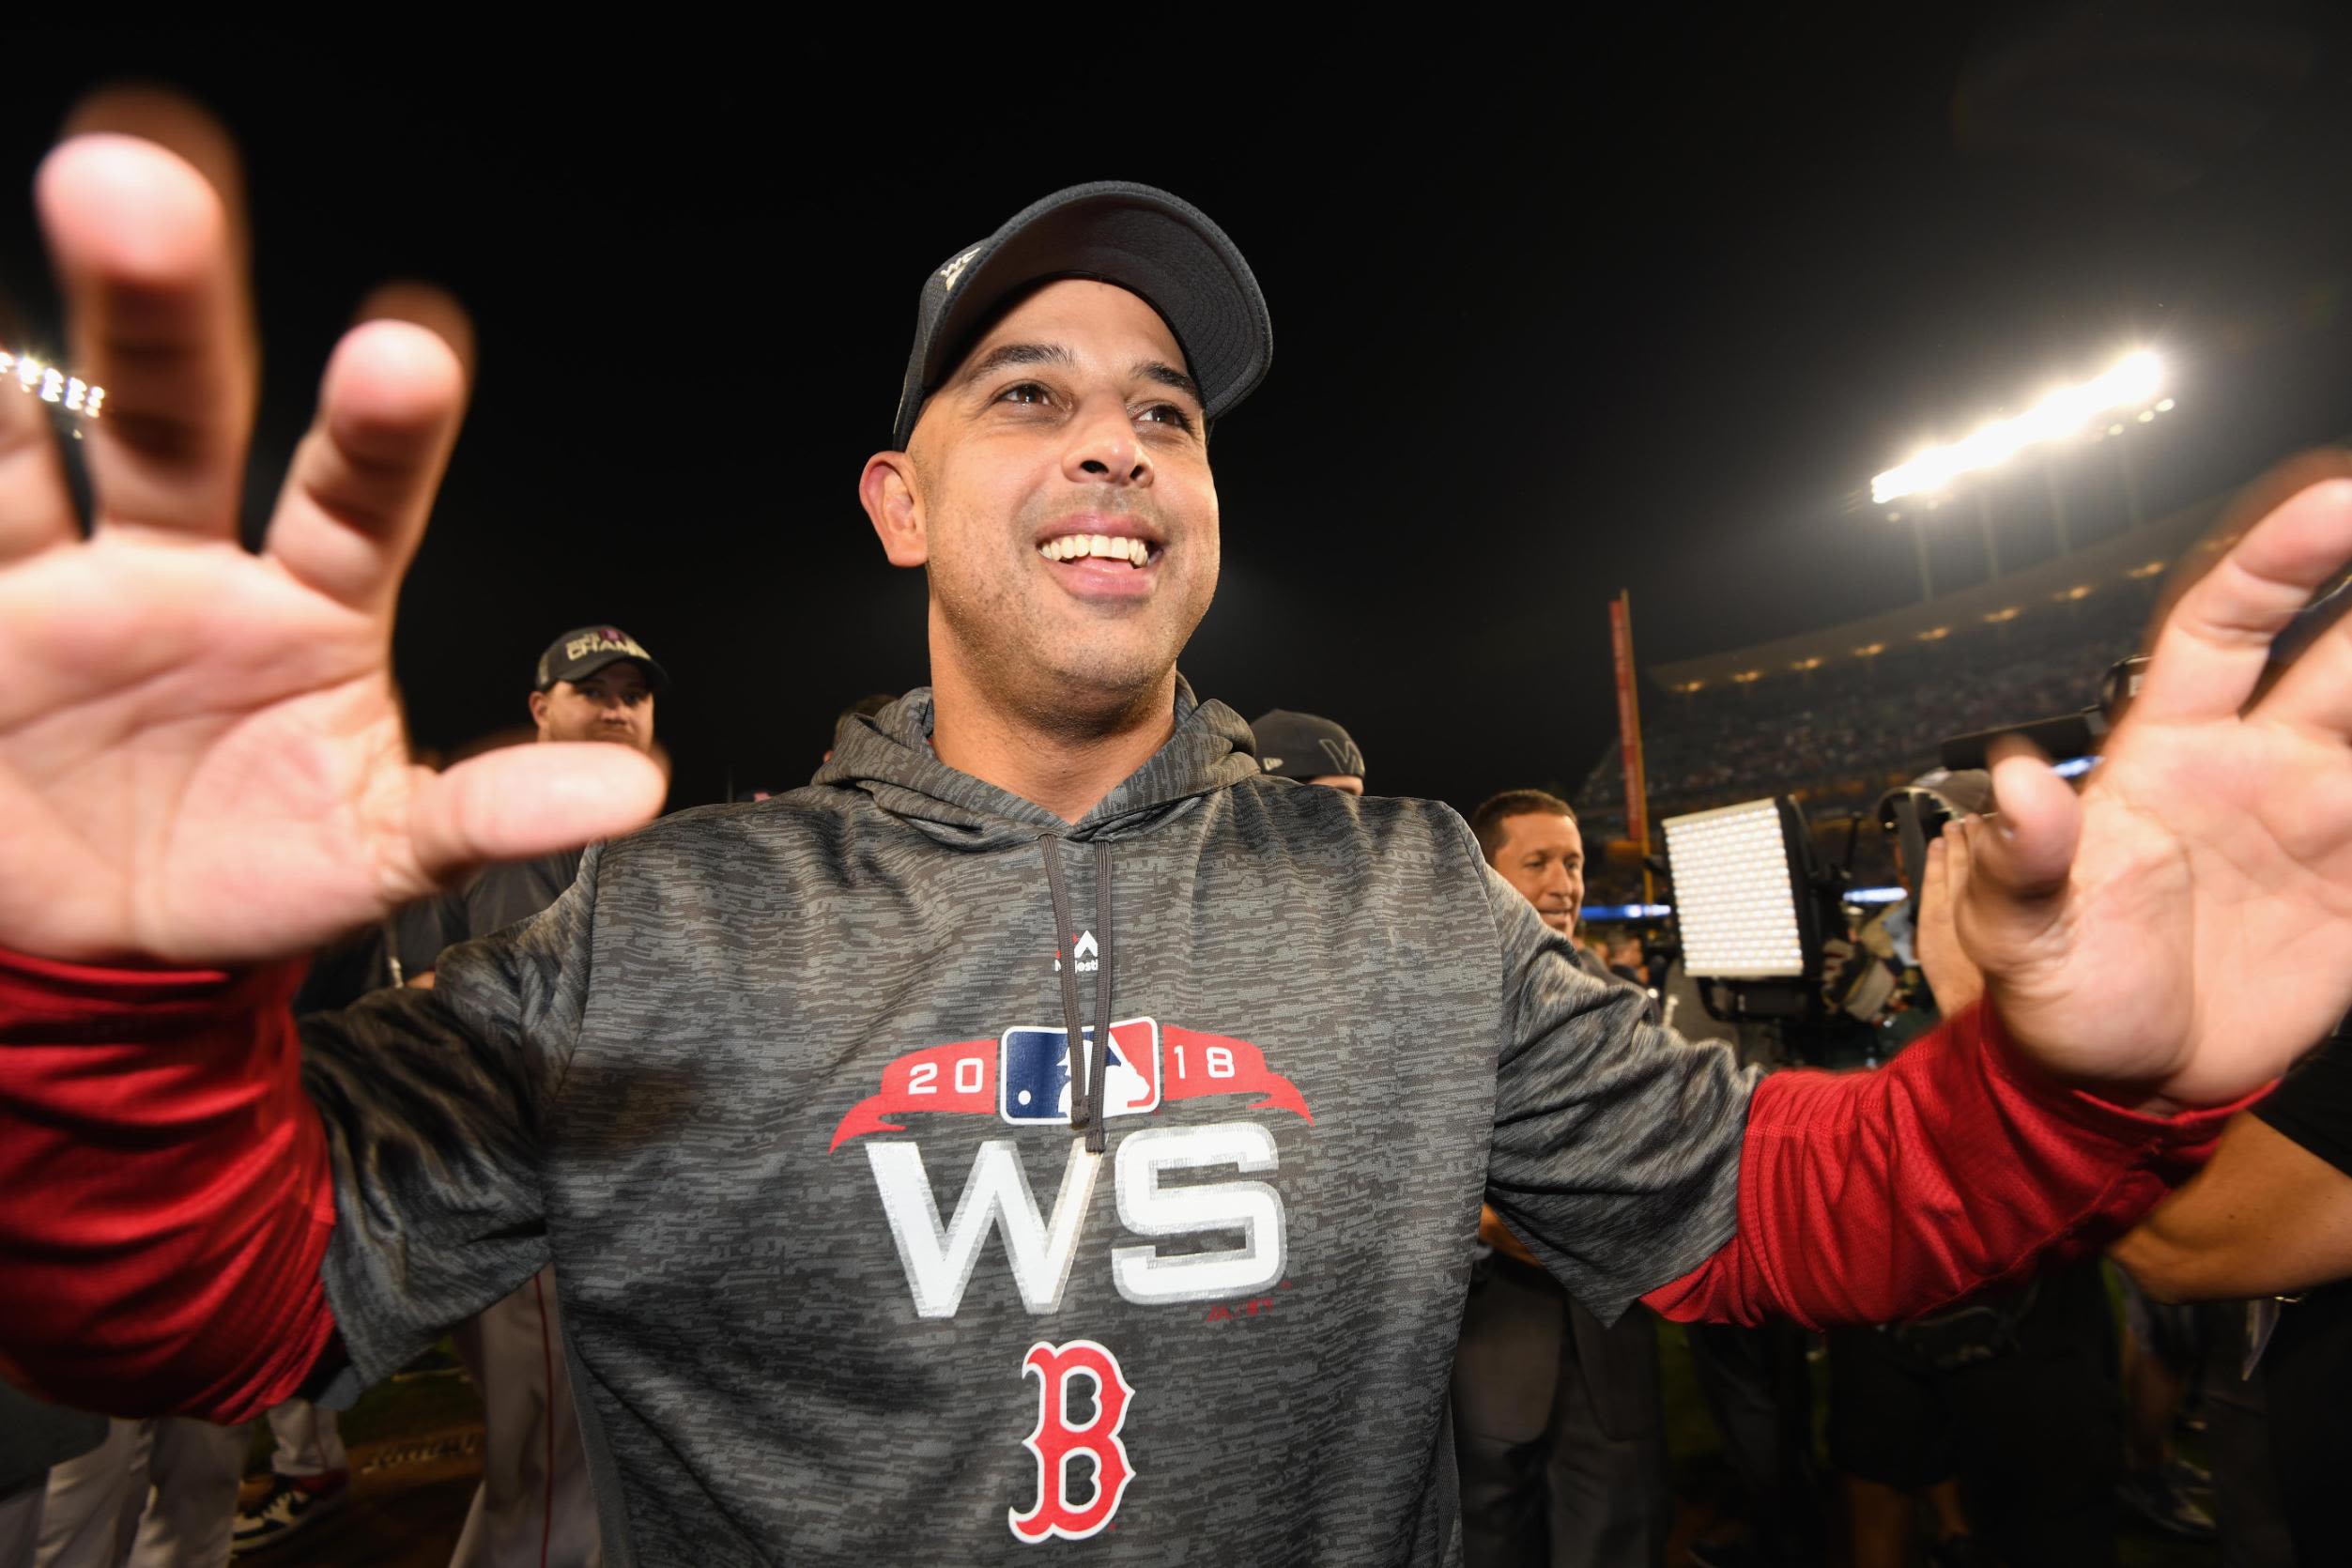 Boston Red Sox, manager Alex Cora agree to part ways 